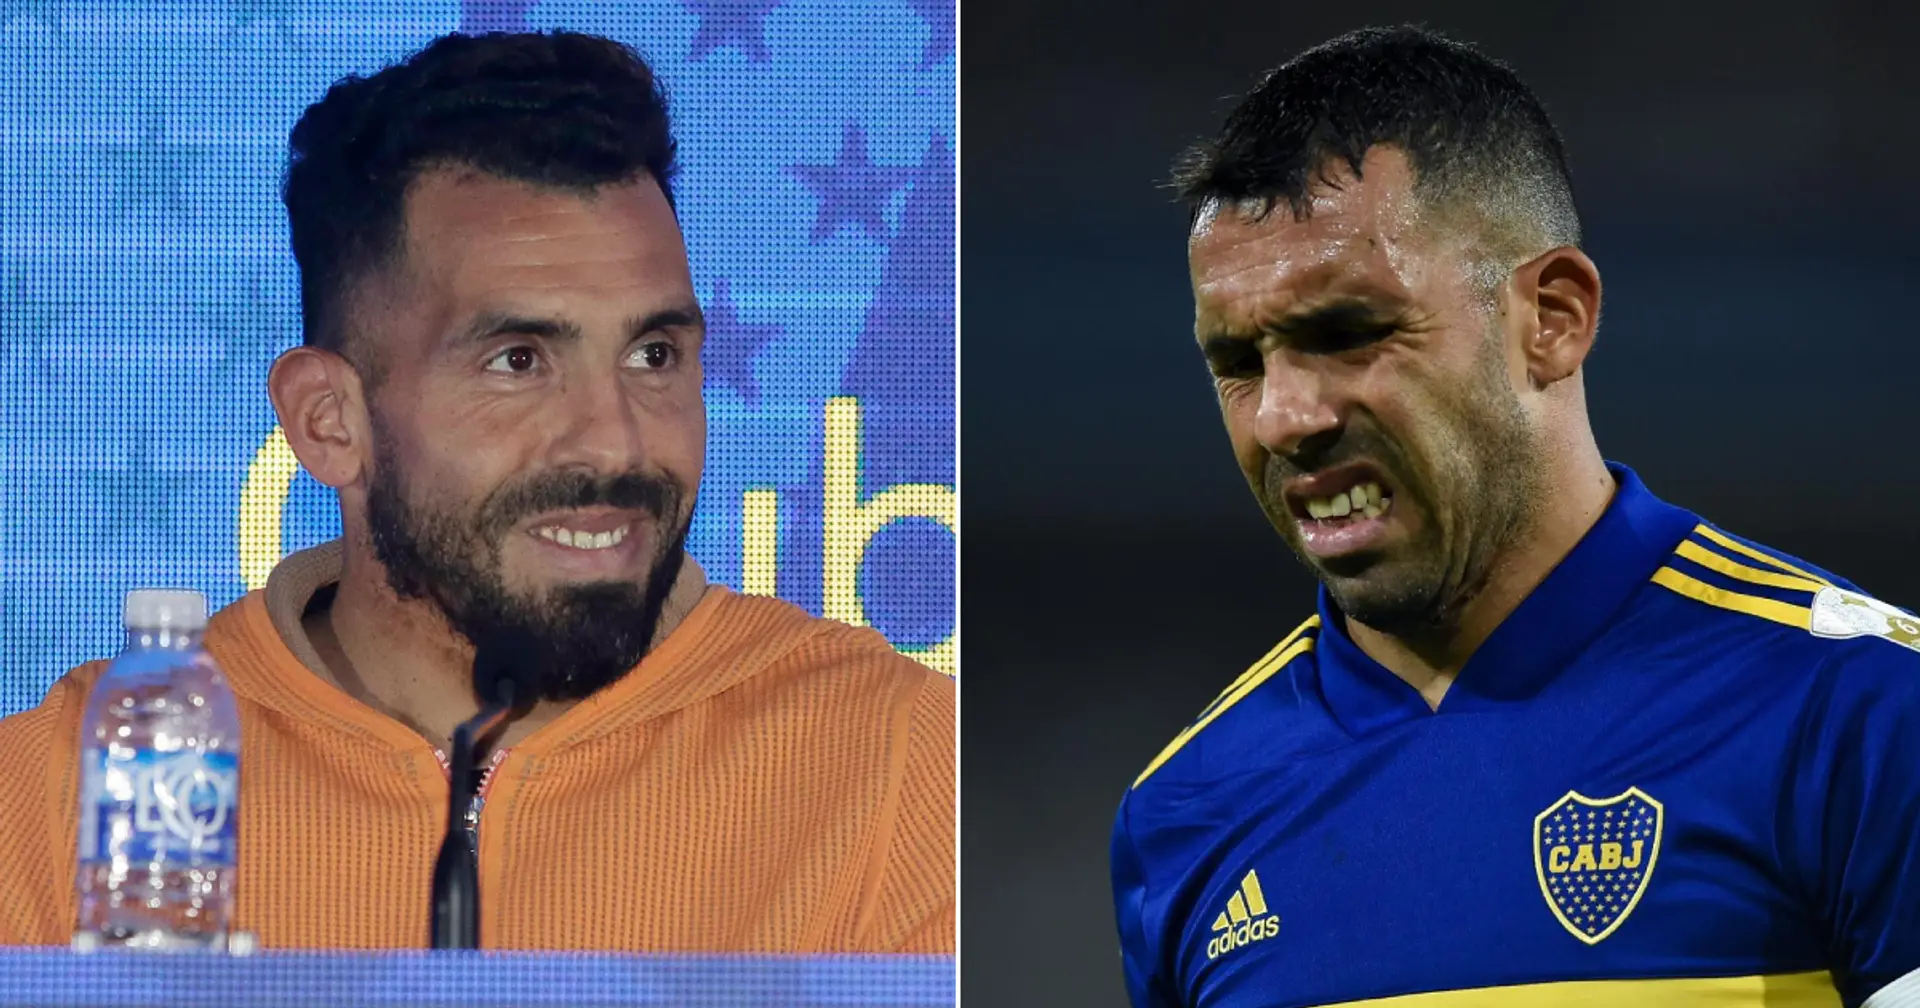 Carlos Tevez announces retirement after losing his 'number one fan'